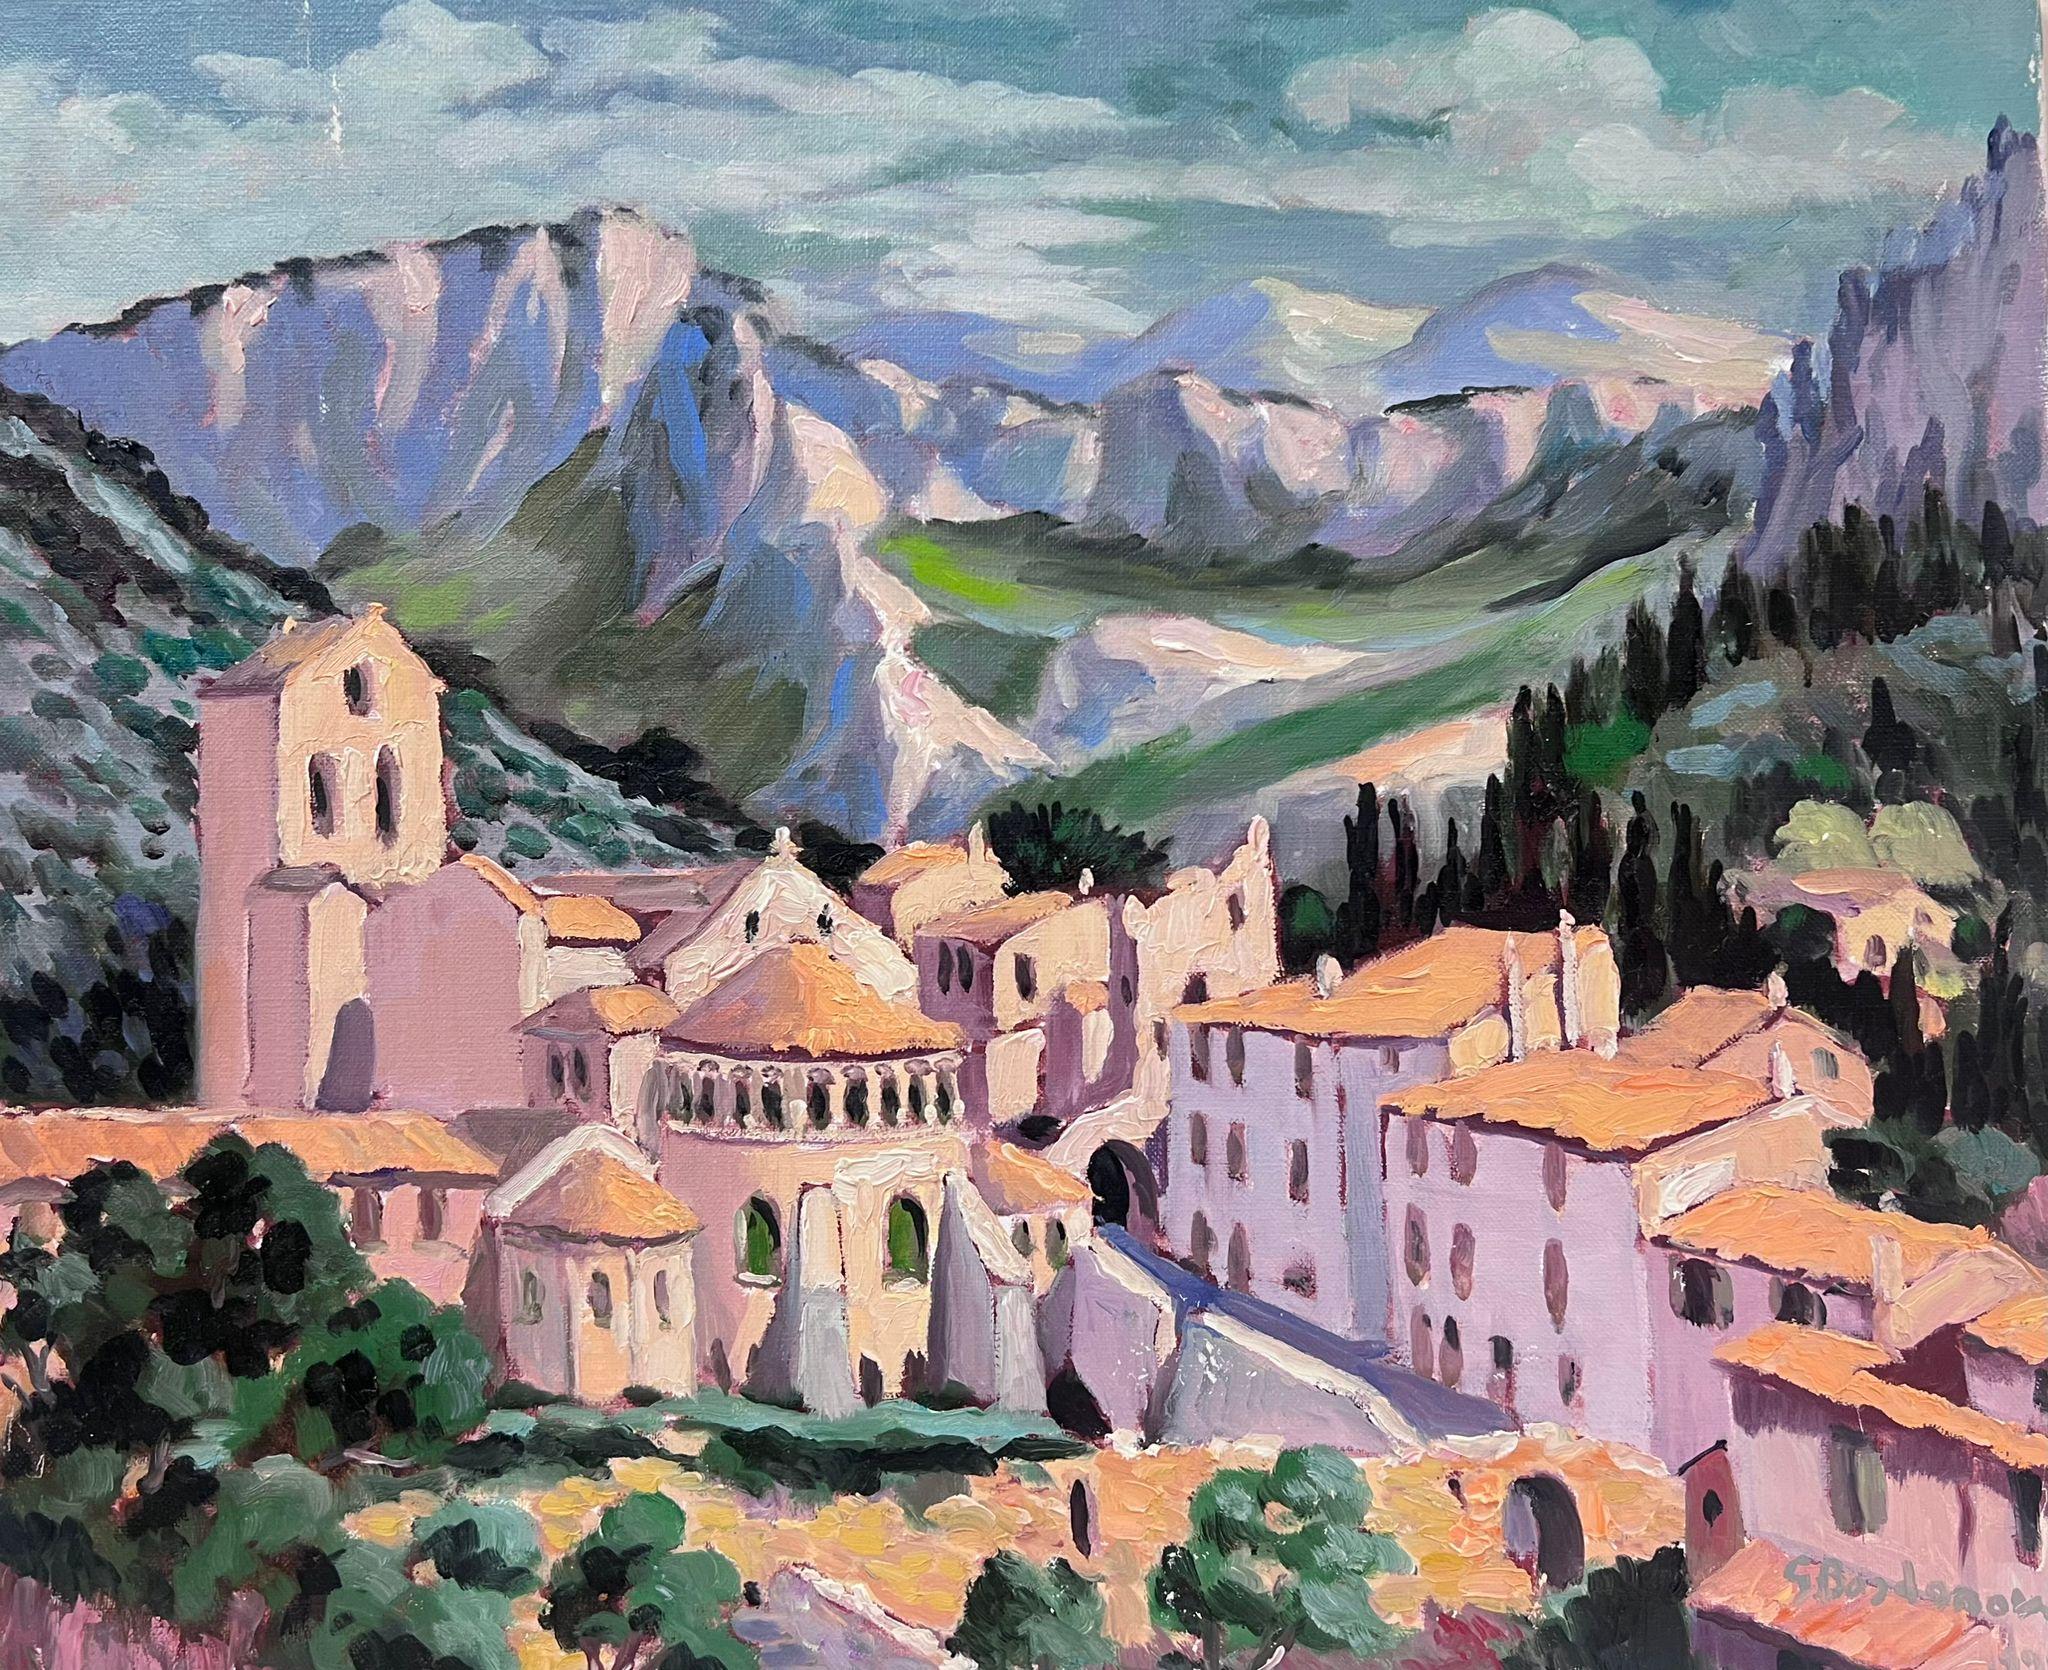 Landscape Painting Georges Bordonove - Pink French Townes Hidden In The Mountains Huile impressionniste contemporaine